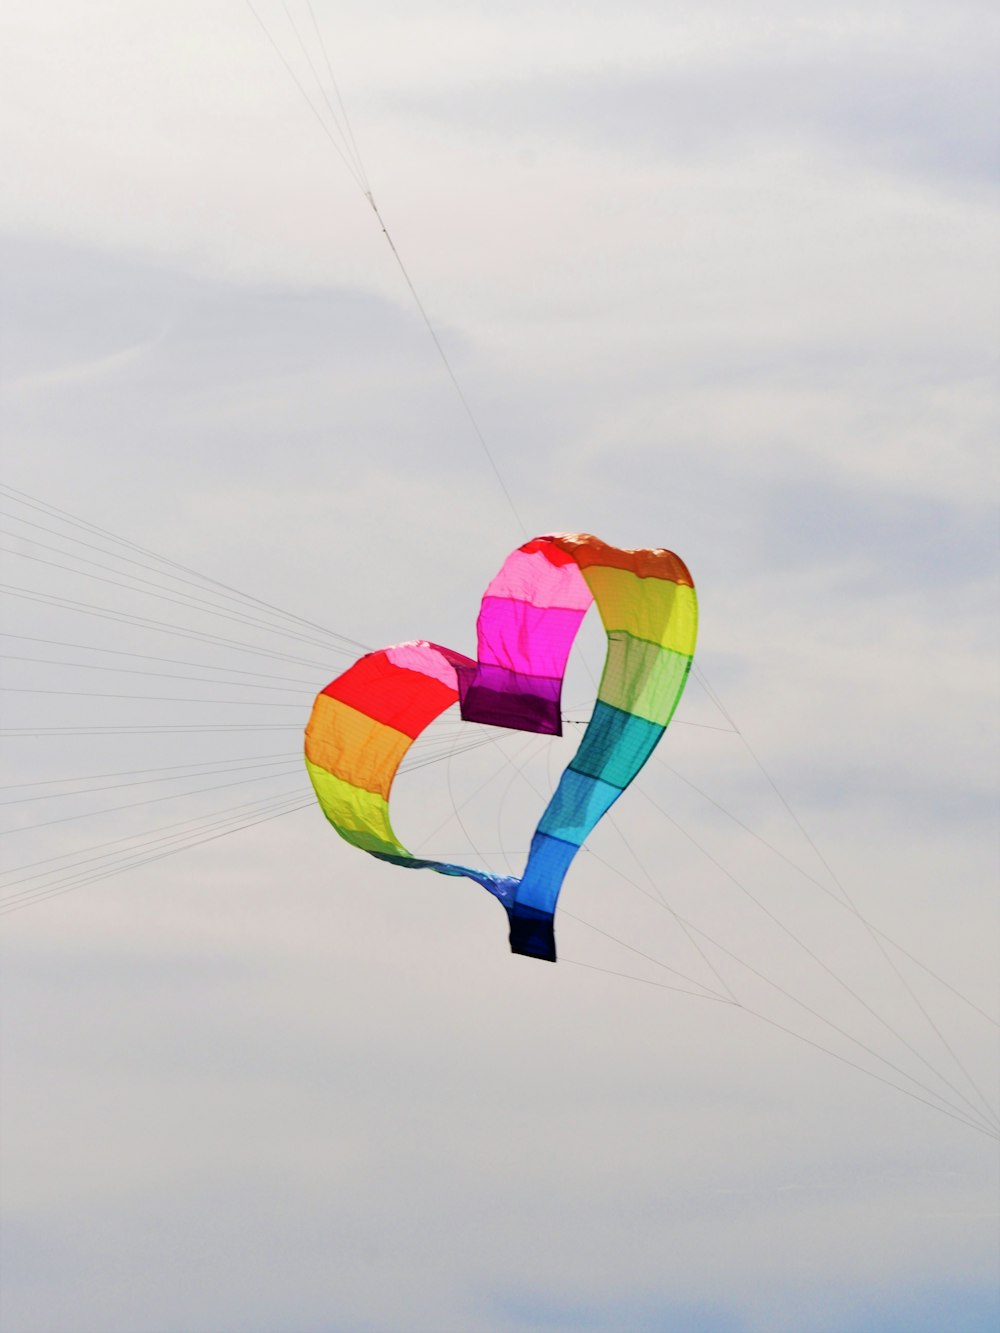 a colorful kite in the sky